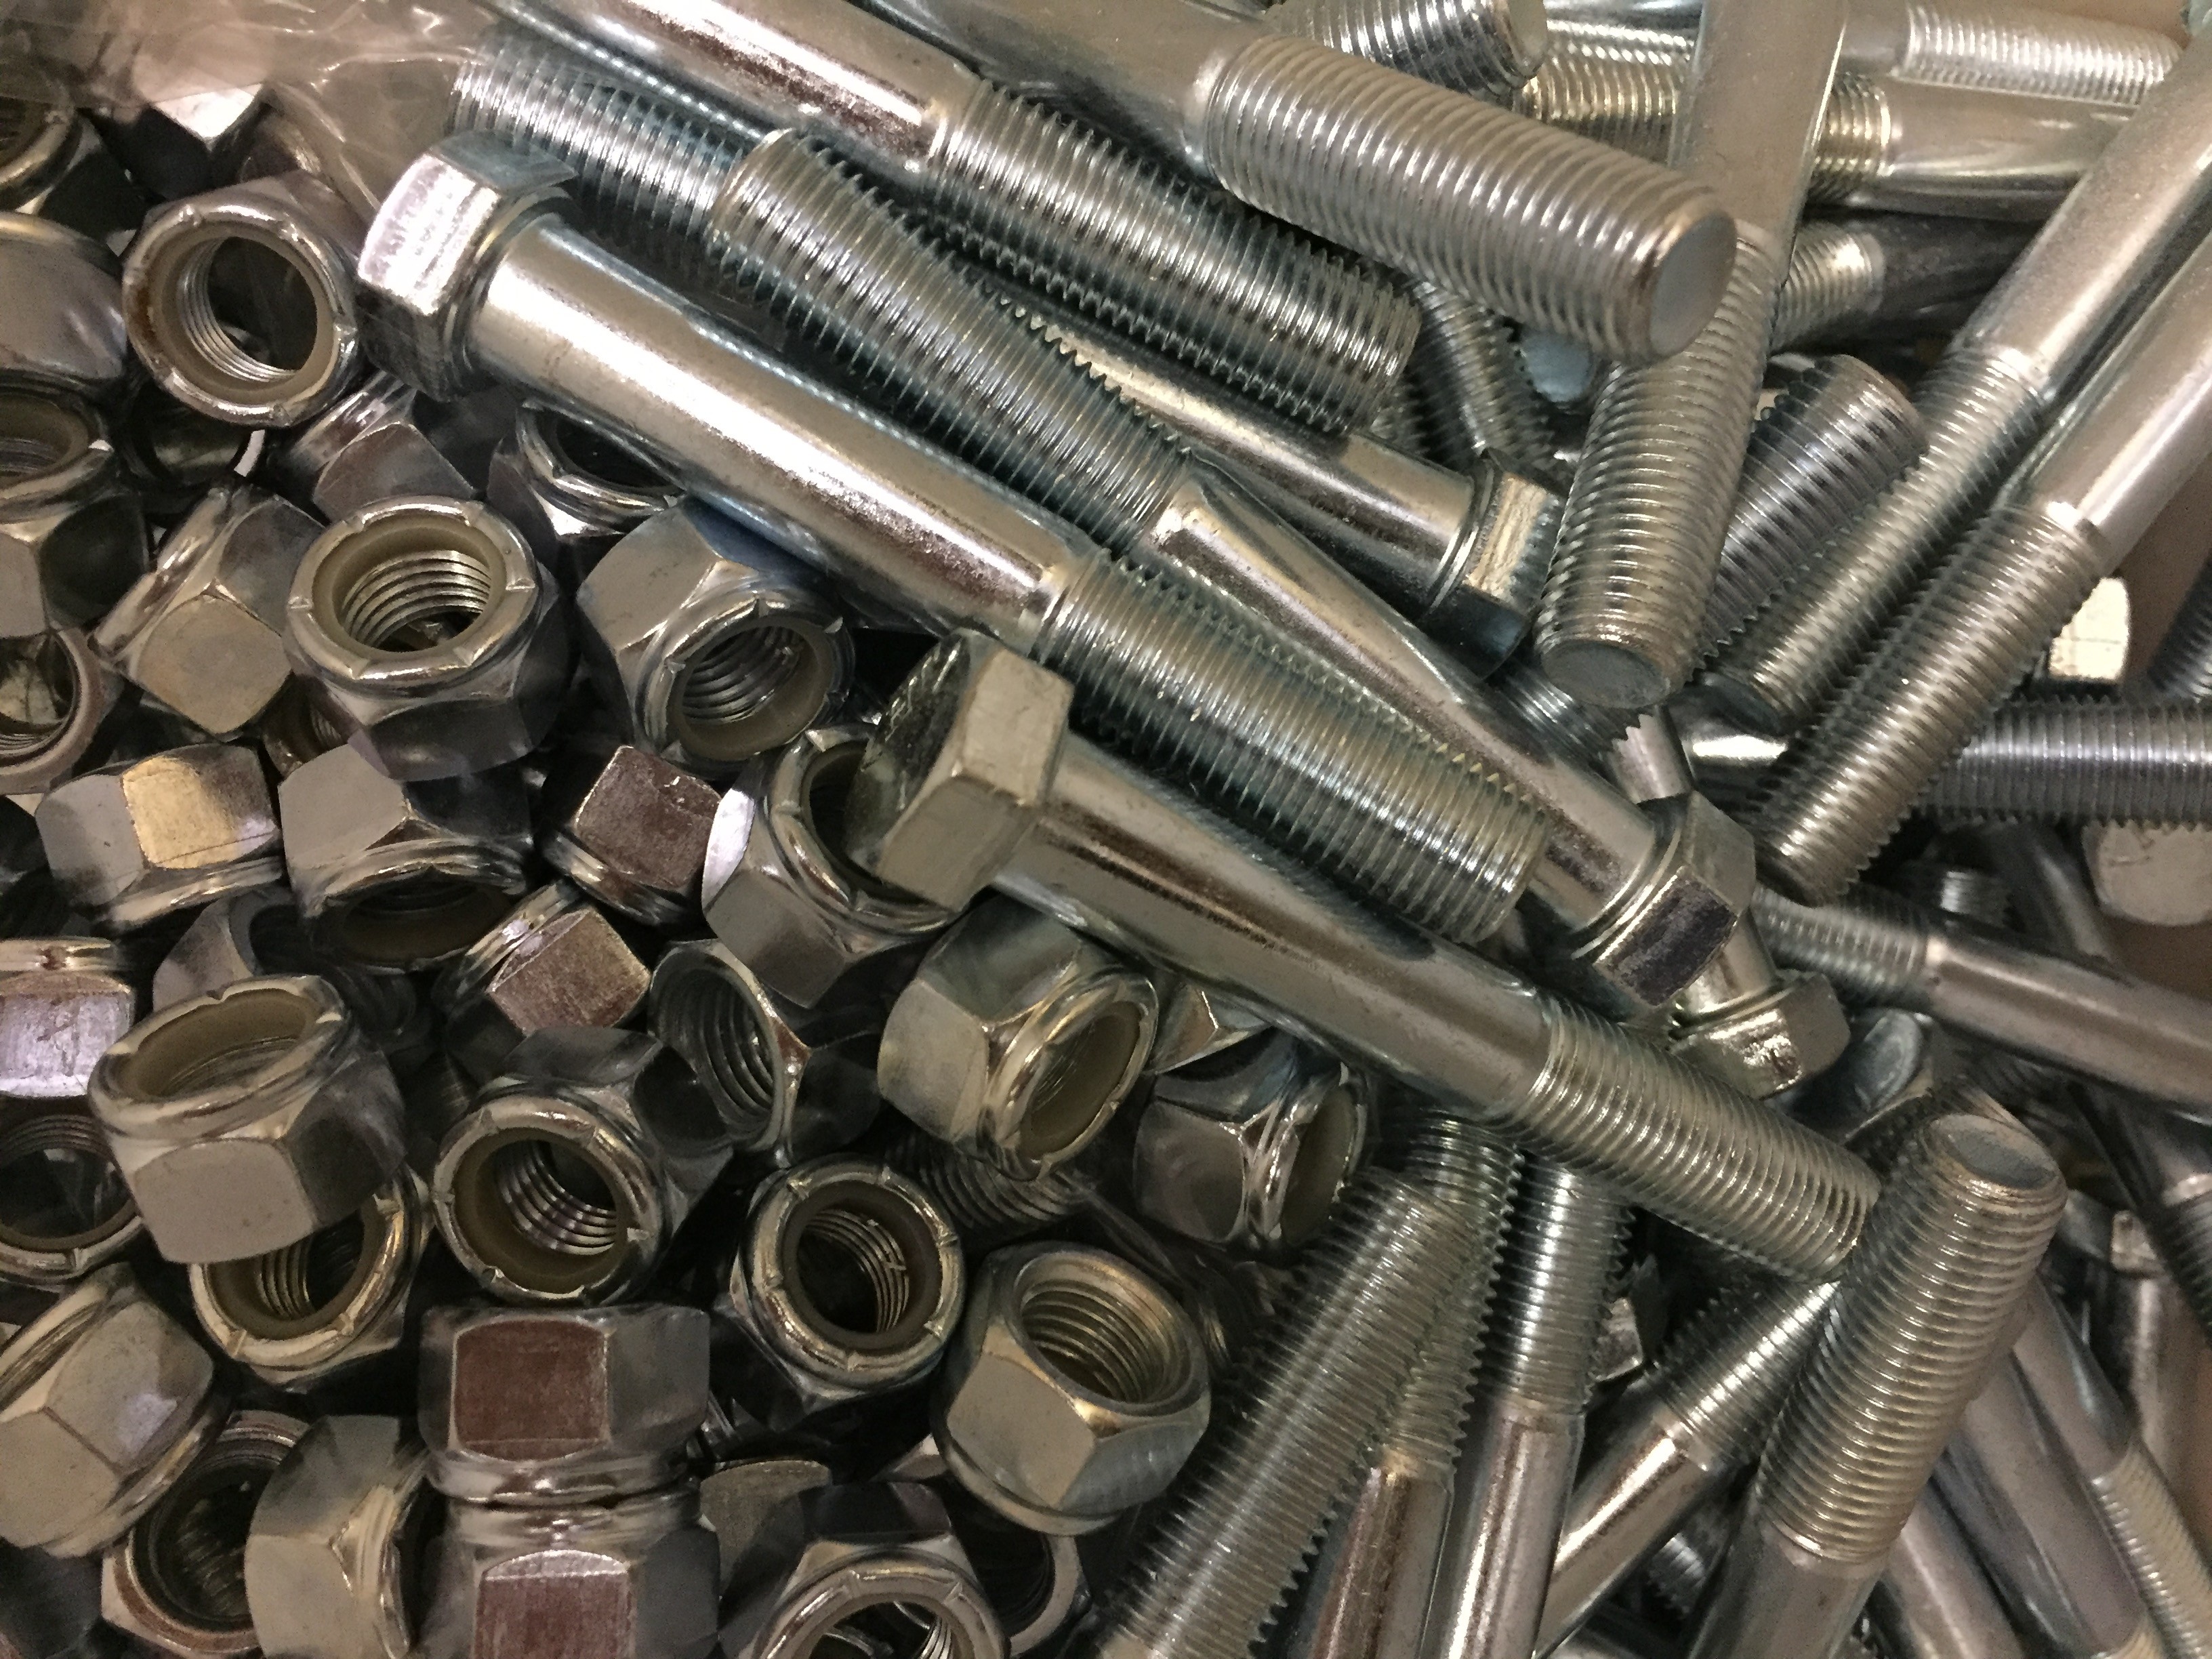 Coupling Bolts